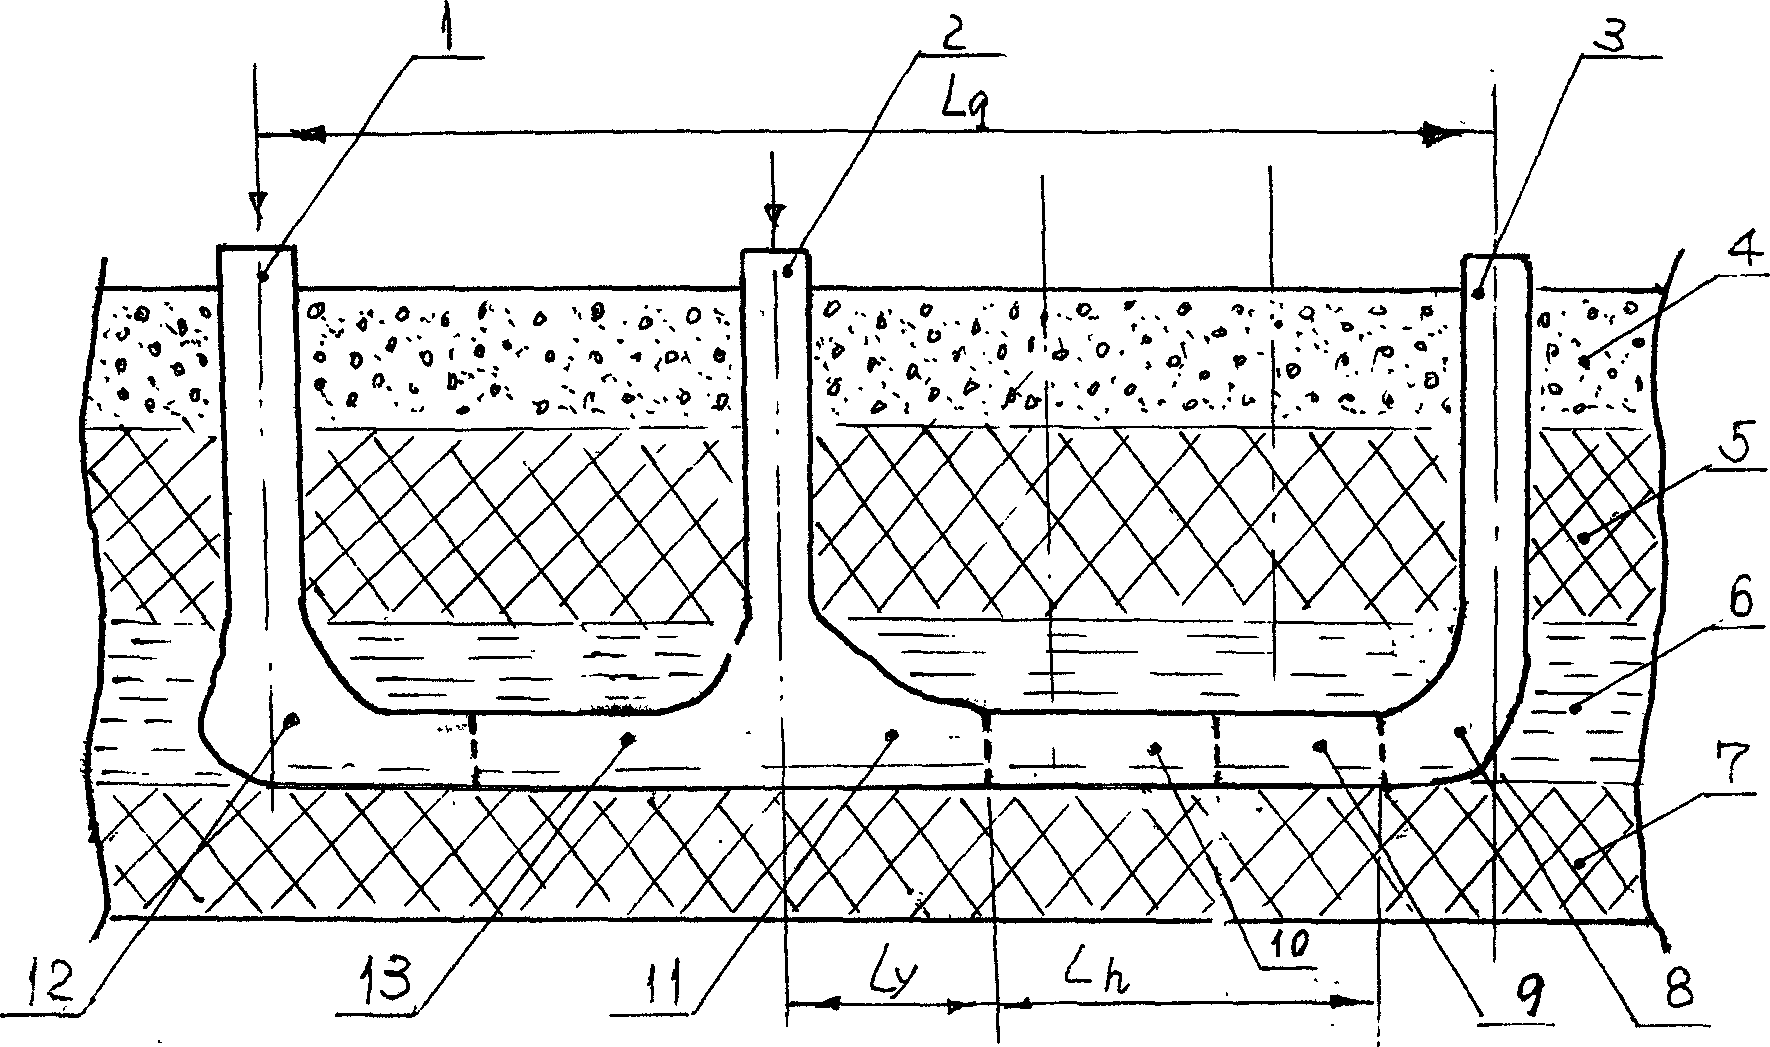 Symbolic gas detecting, regulating and controlling method for underground coal gasification